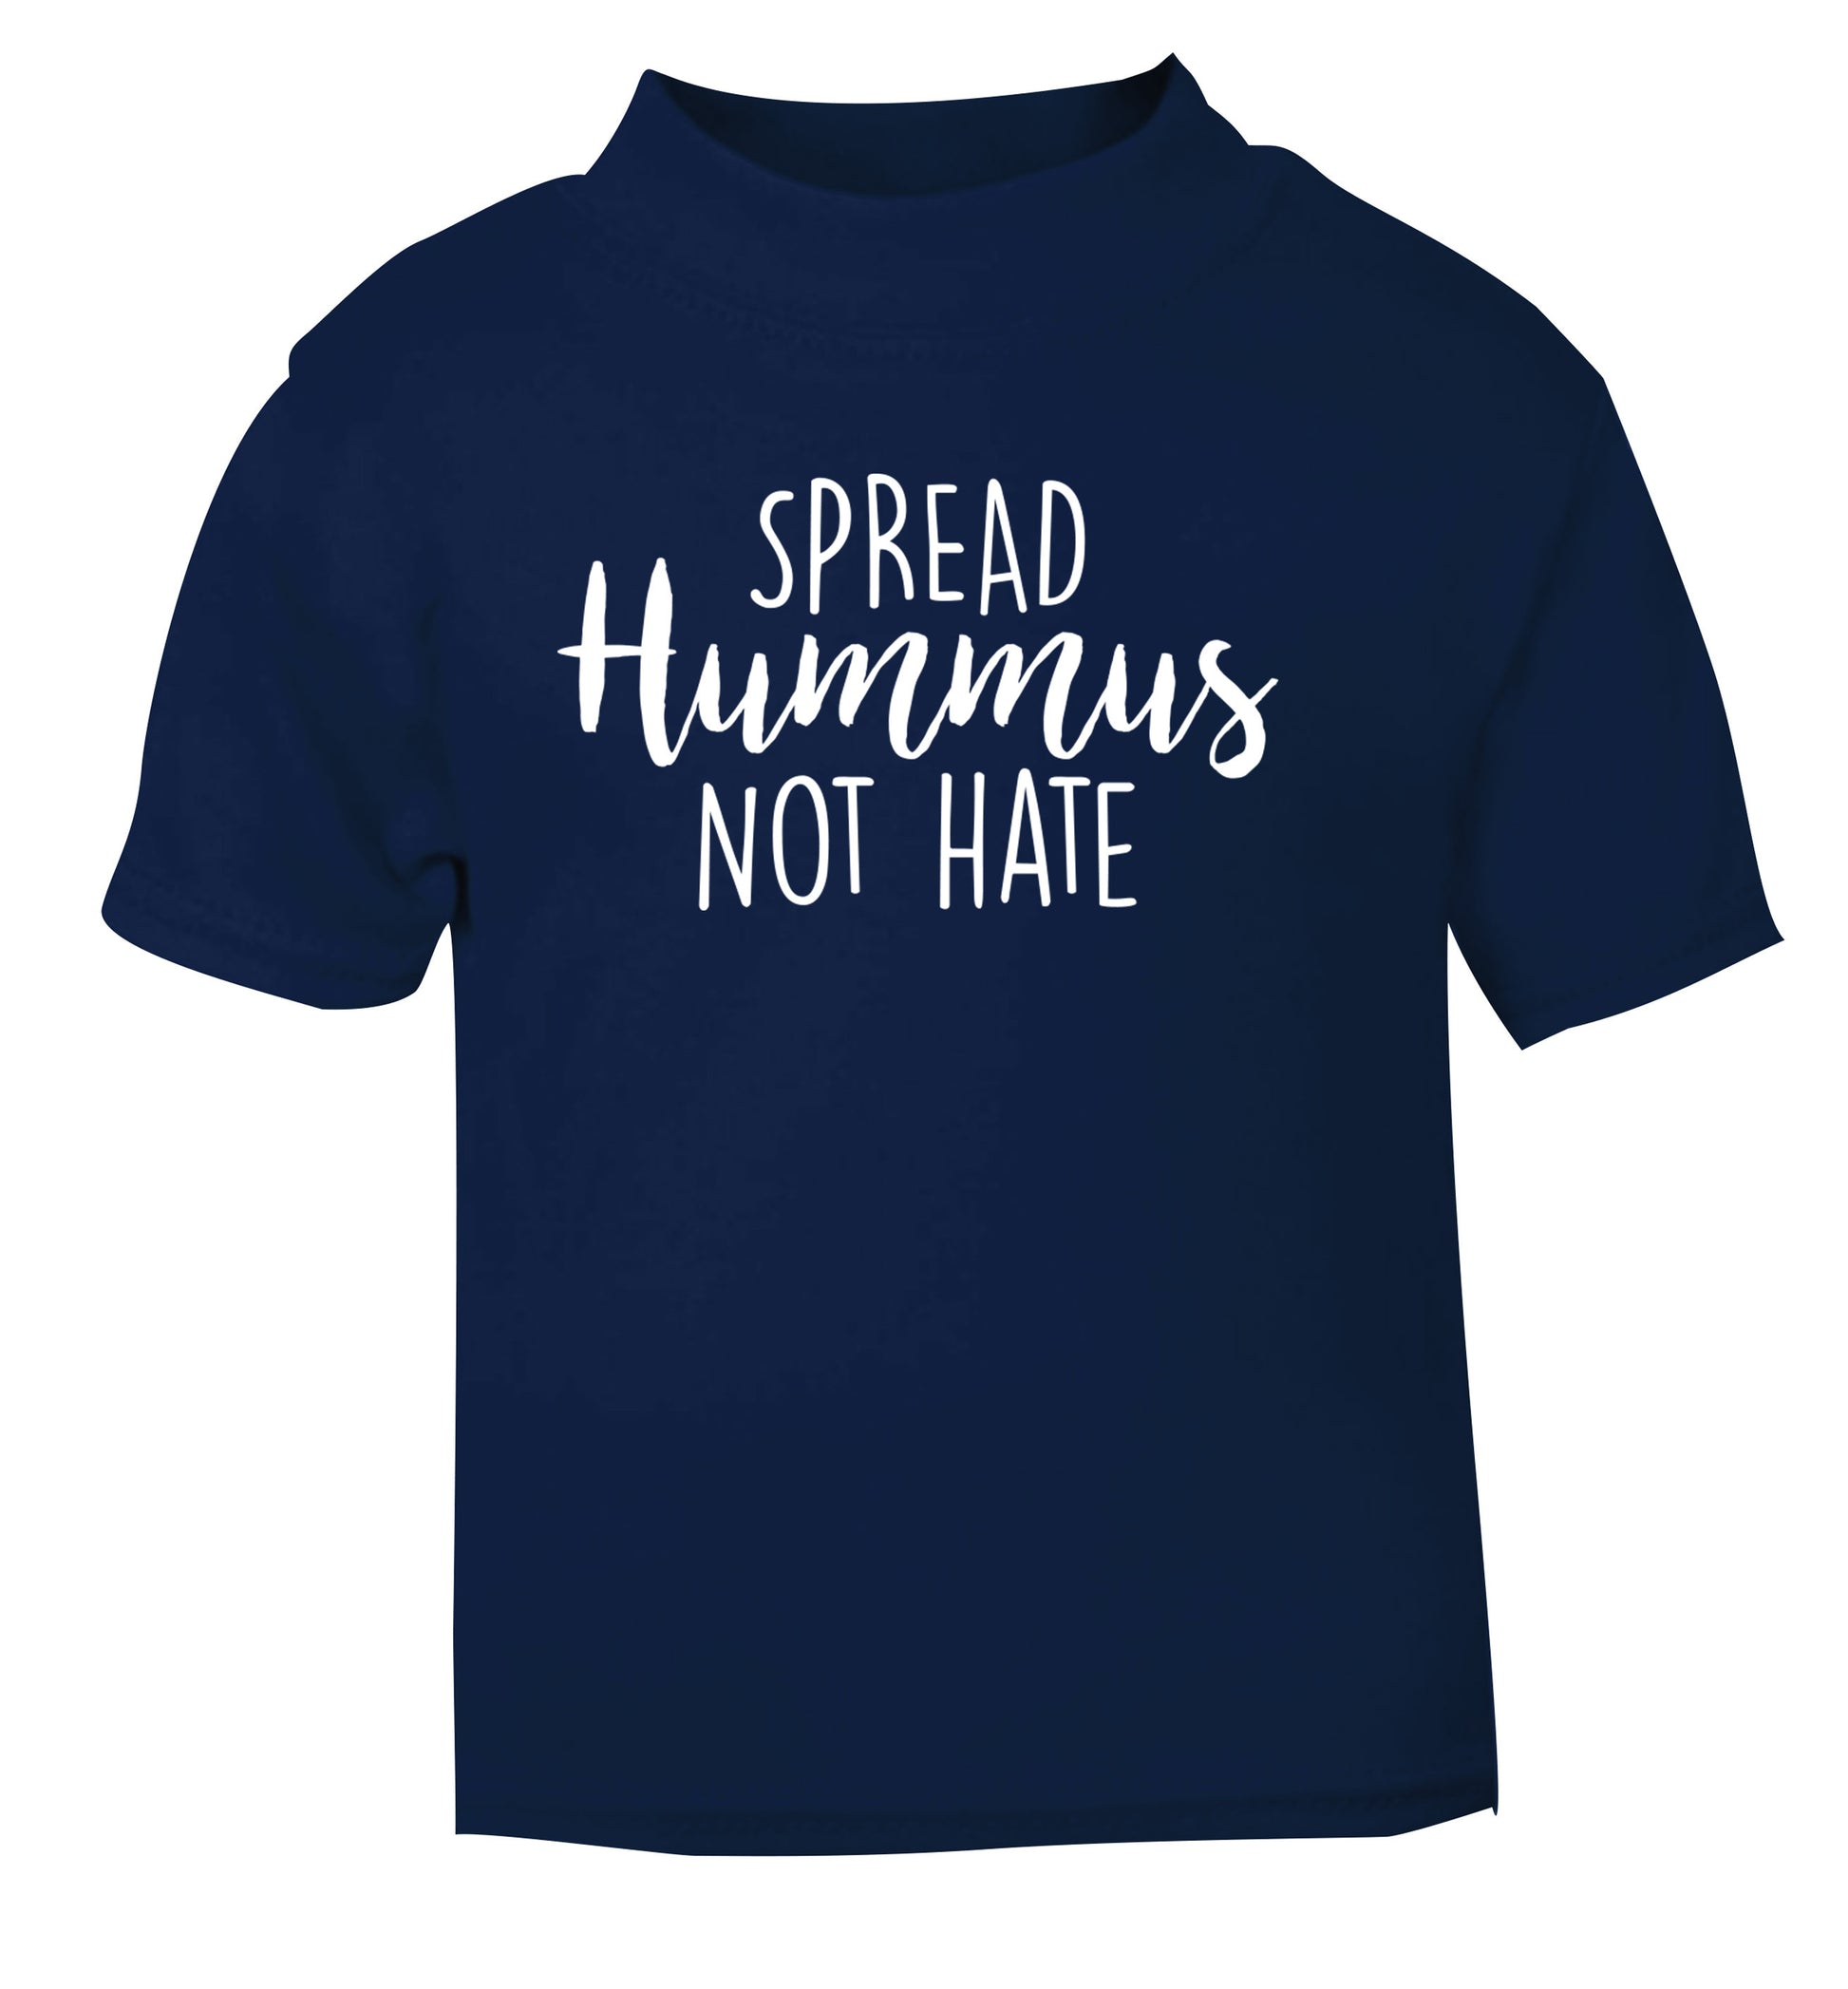 Spread hummus not hate script text navy Baby Toddler Tshirt 2 Years